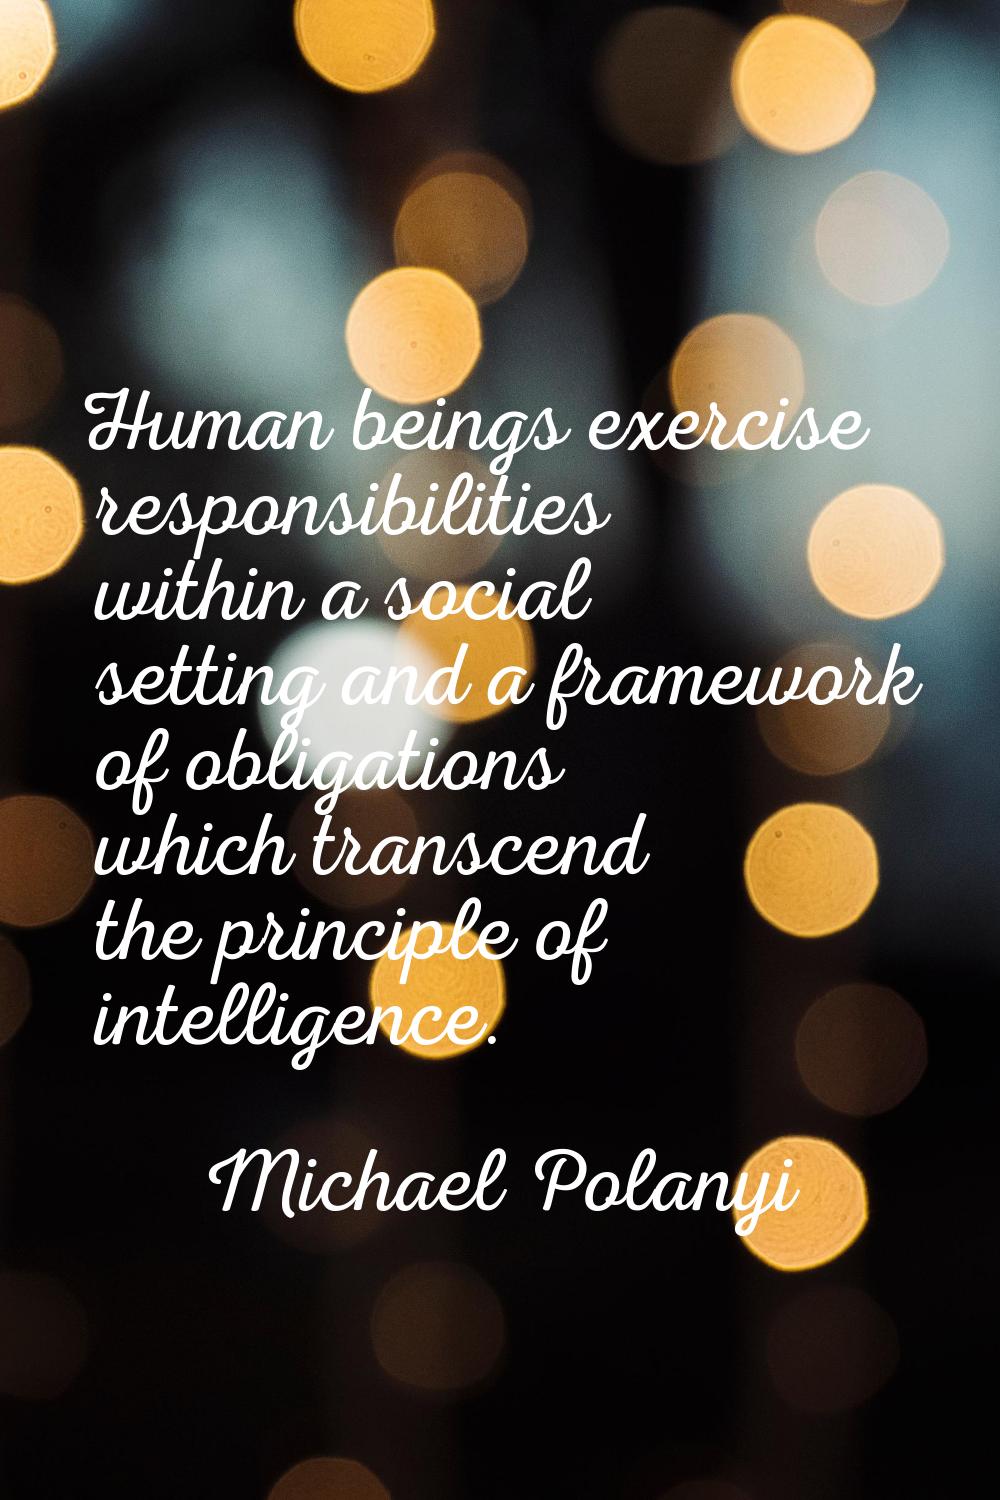 Human beings exercise responsibilities within a social setting and a framework of obligations which